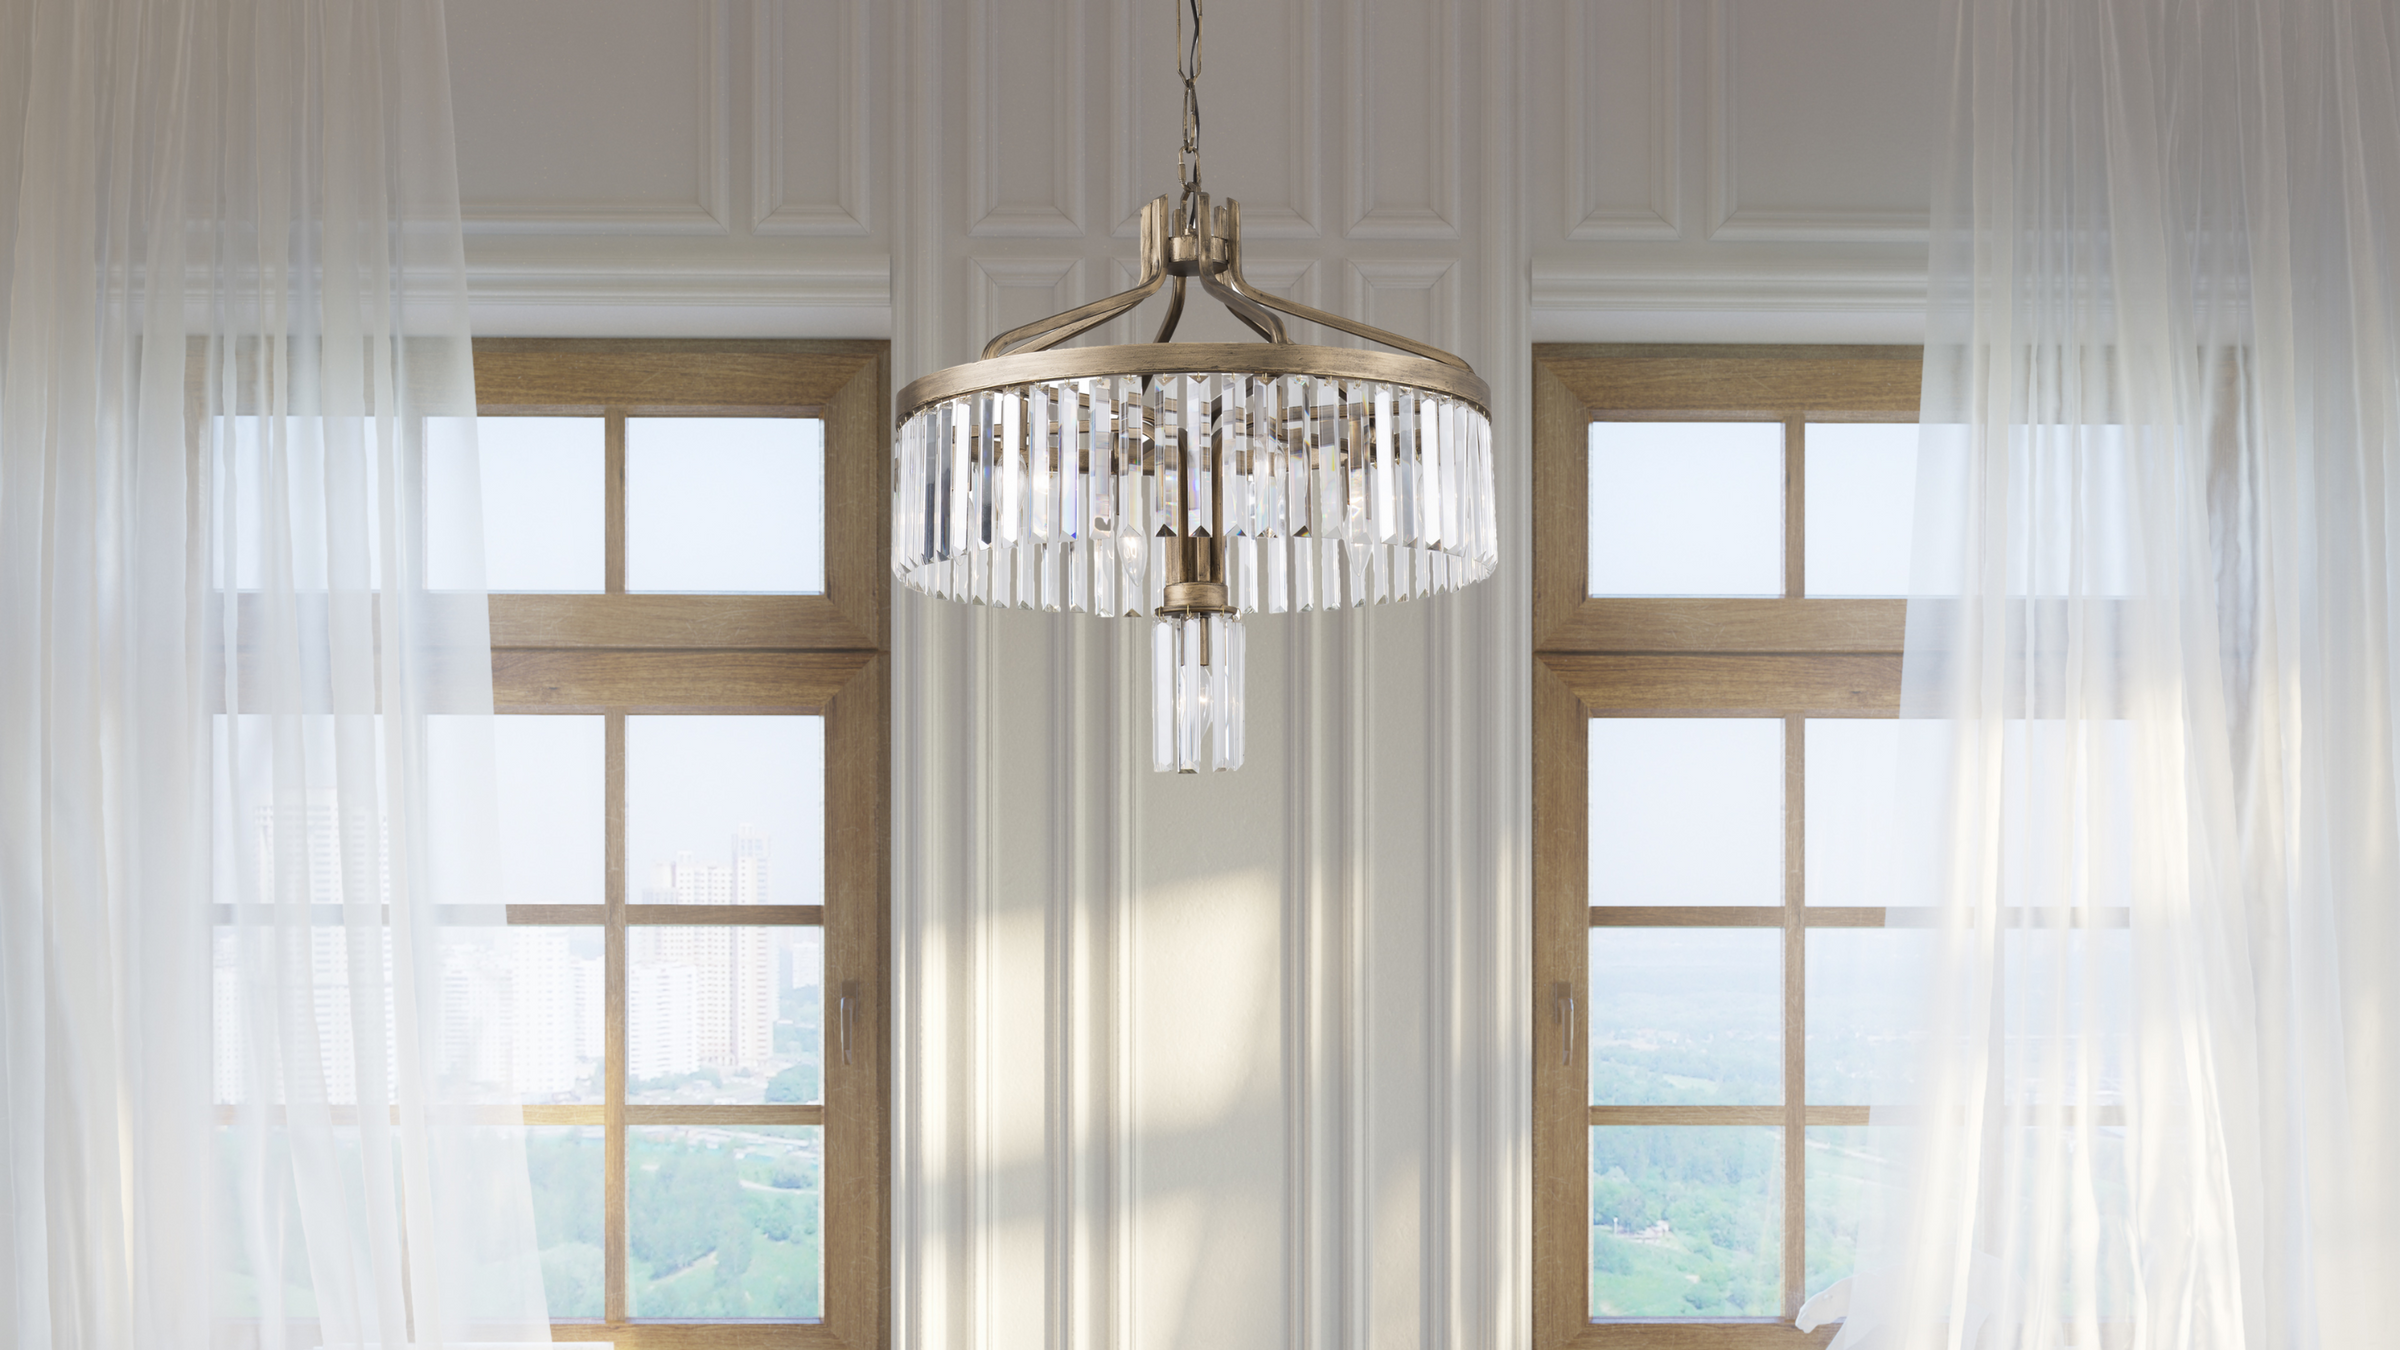 Social club chandelier shown in large room with wood windows and white see-through curtains